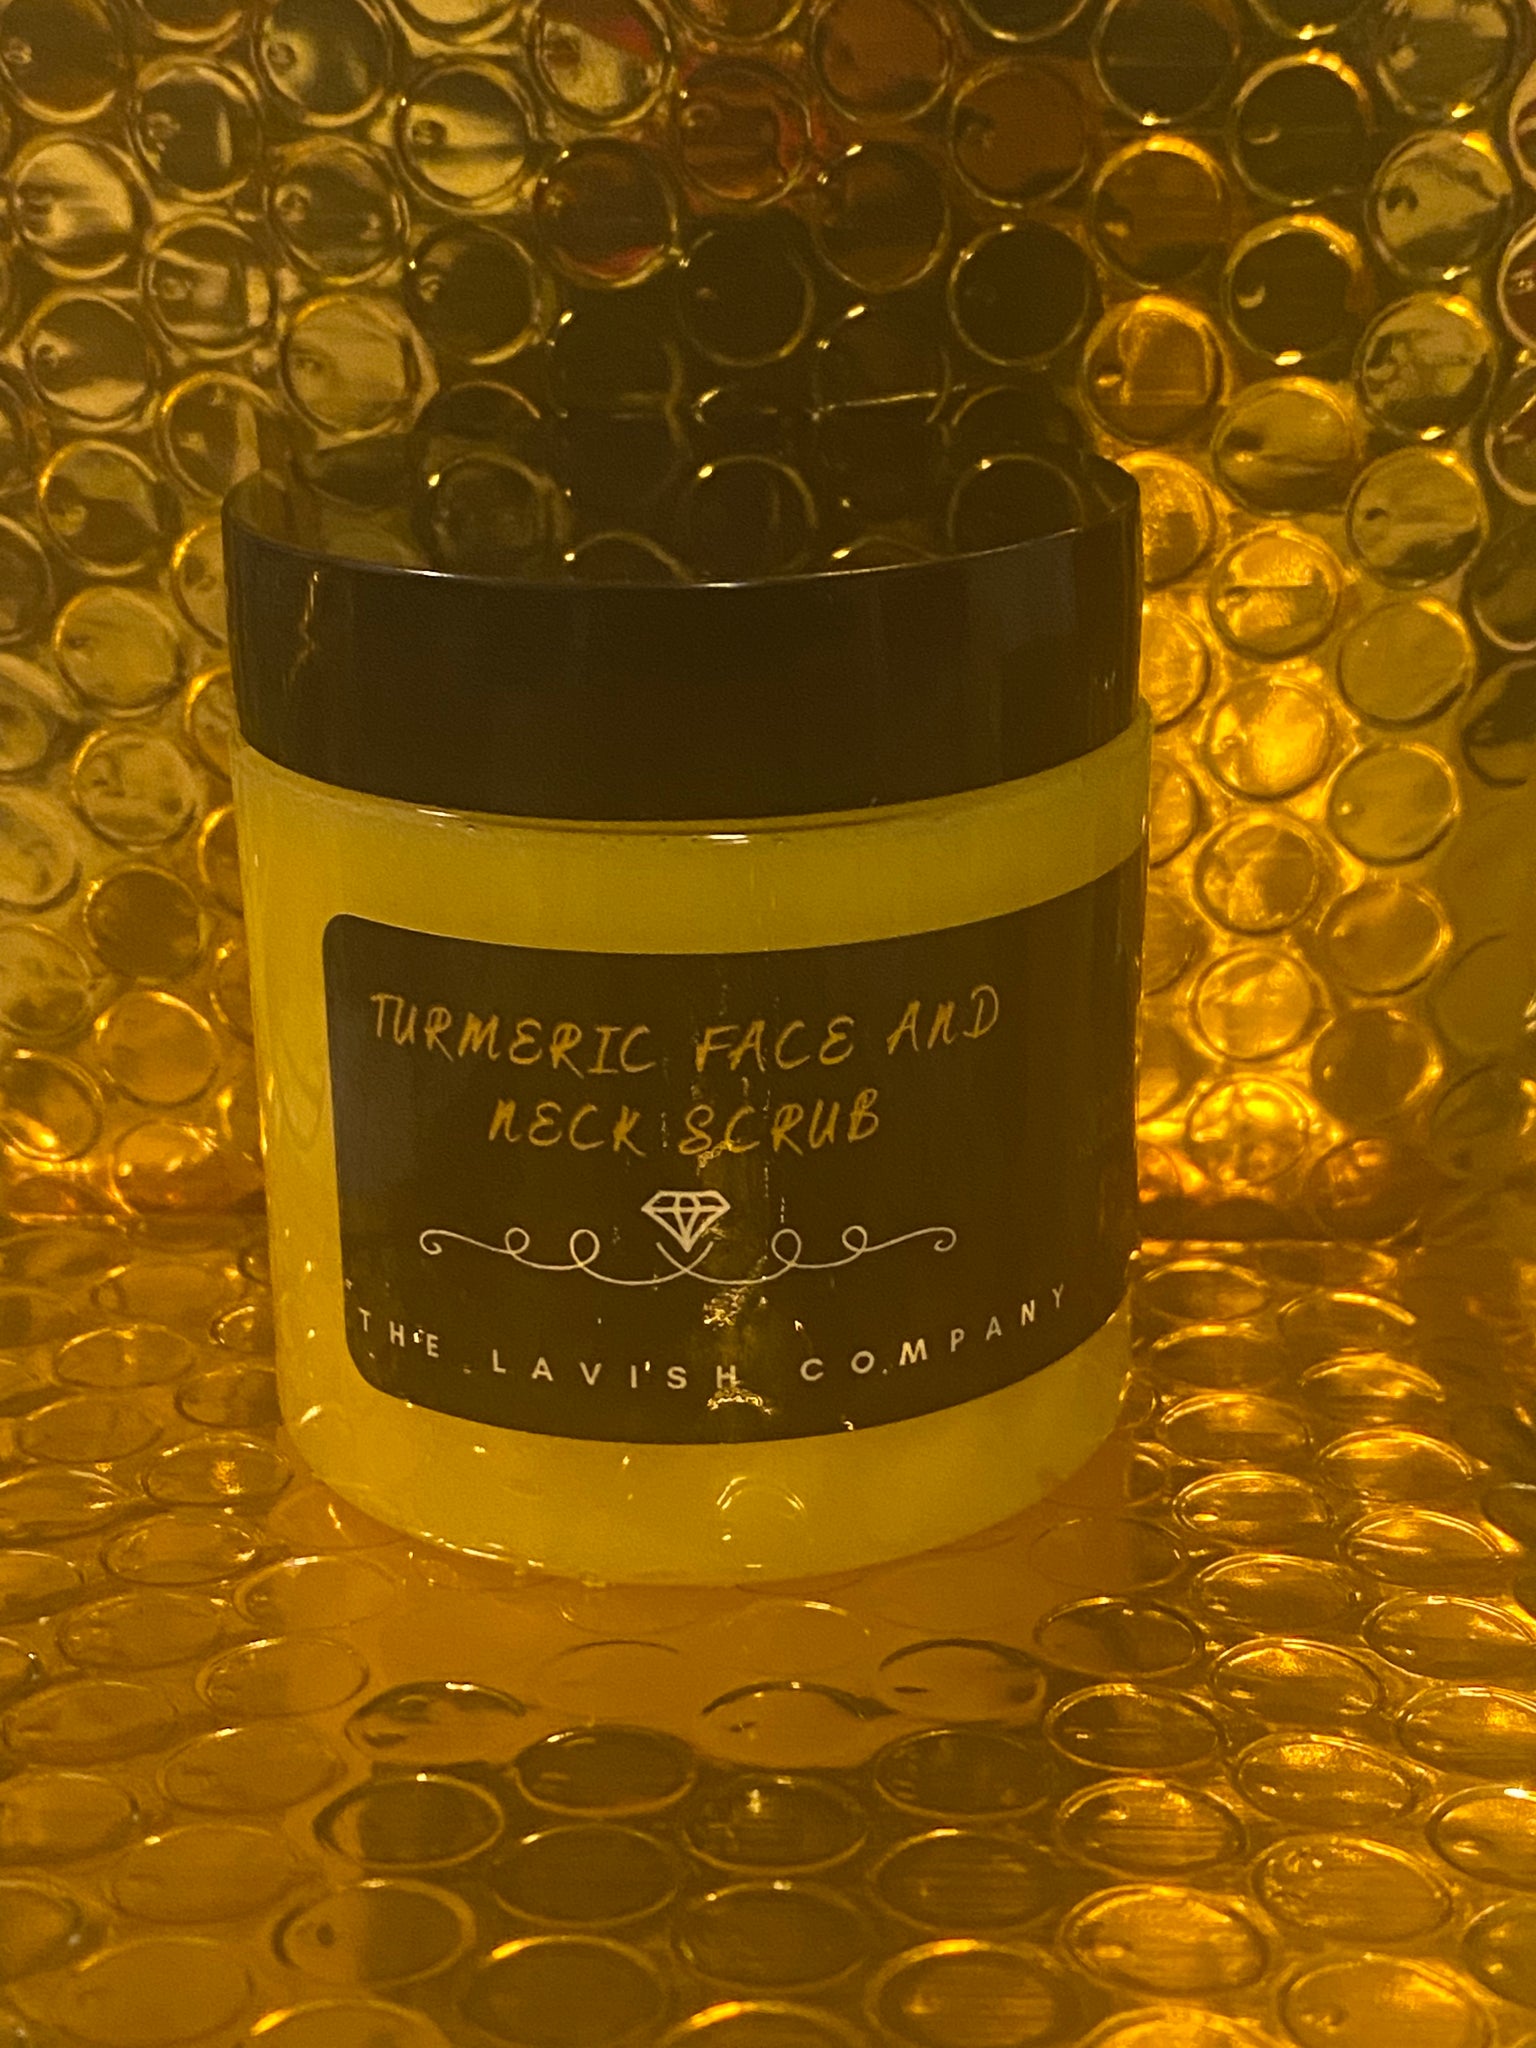 Turmeric Face and Neck Scrub + FREE Exfoliating Face pad